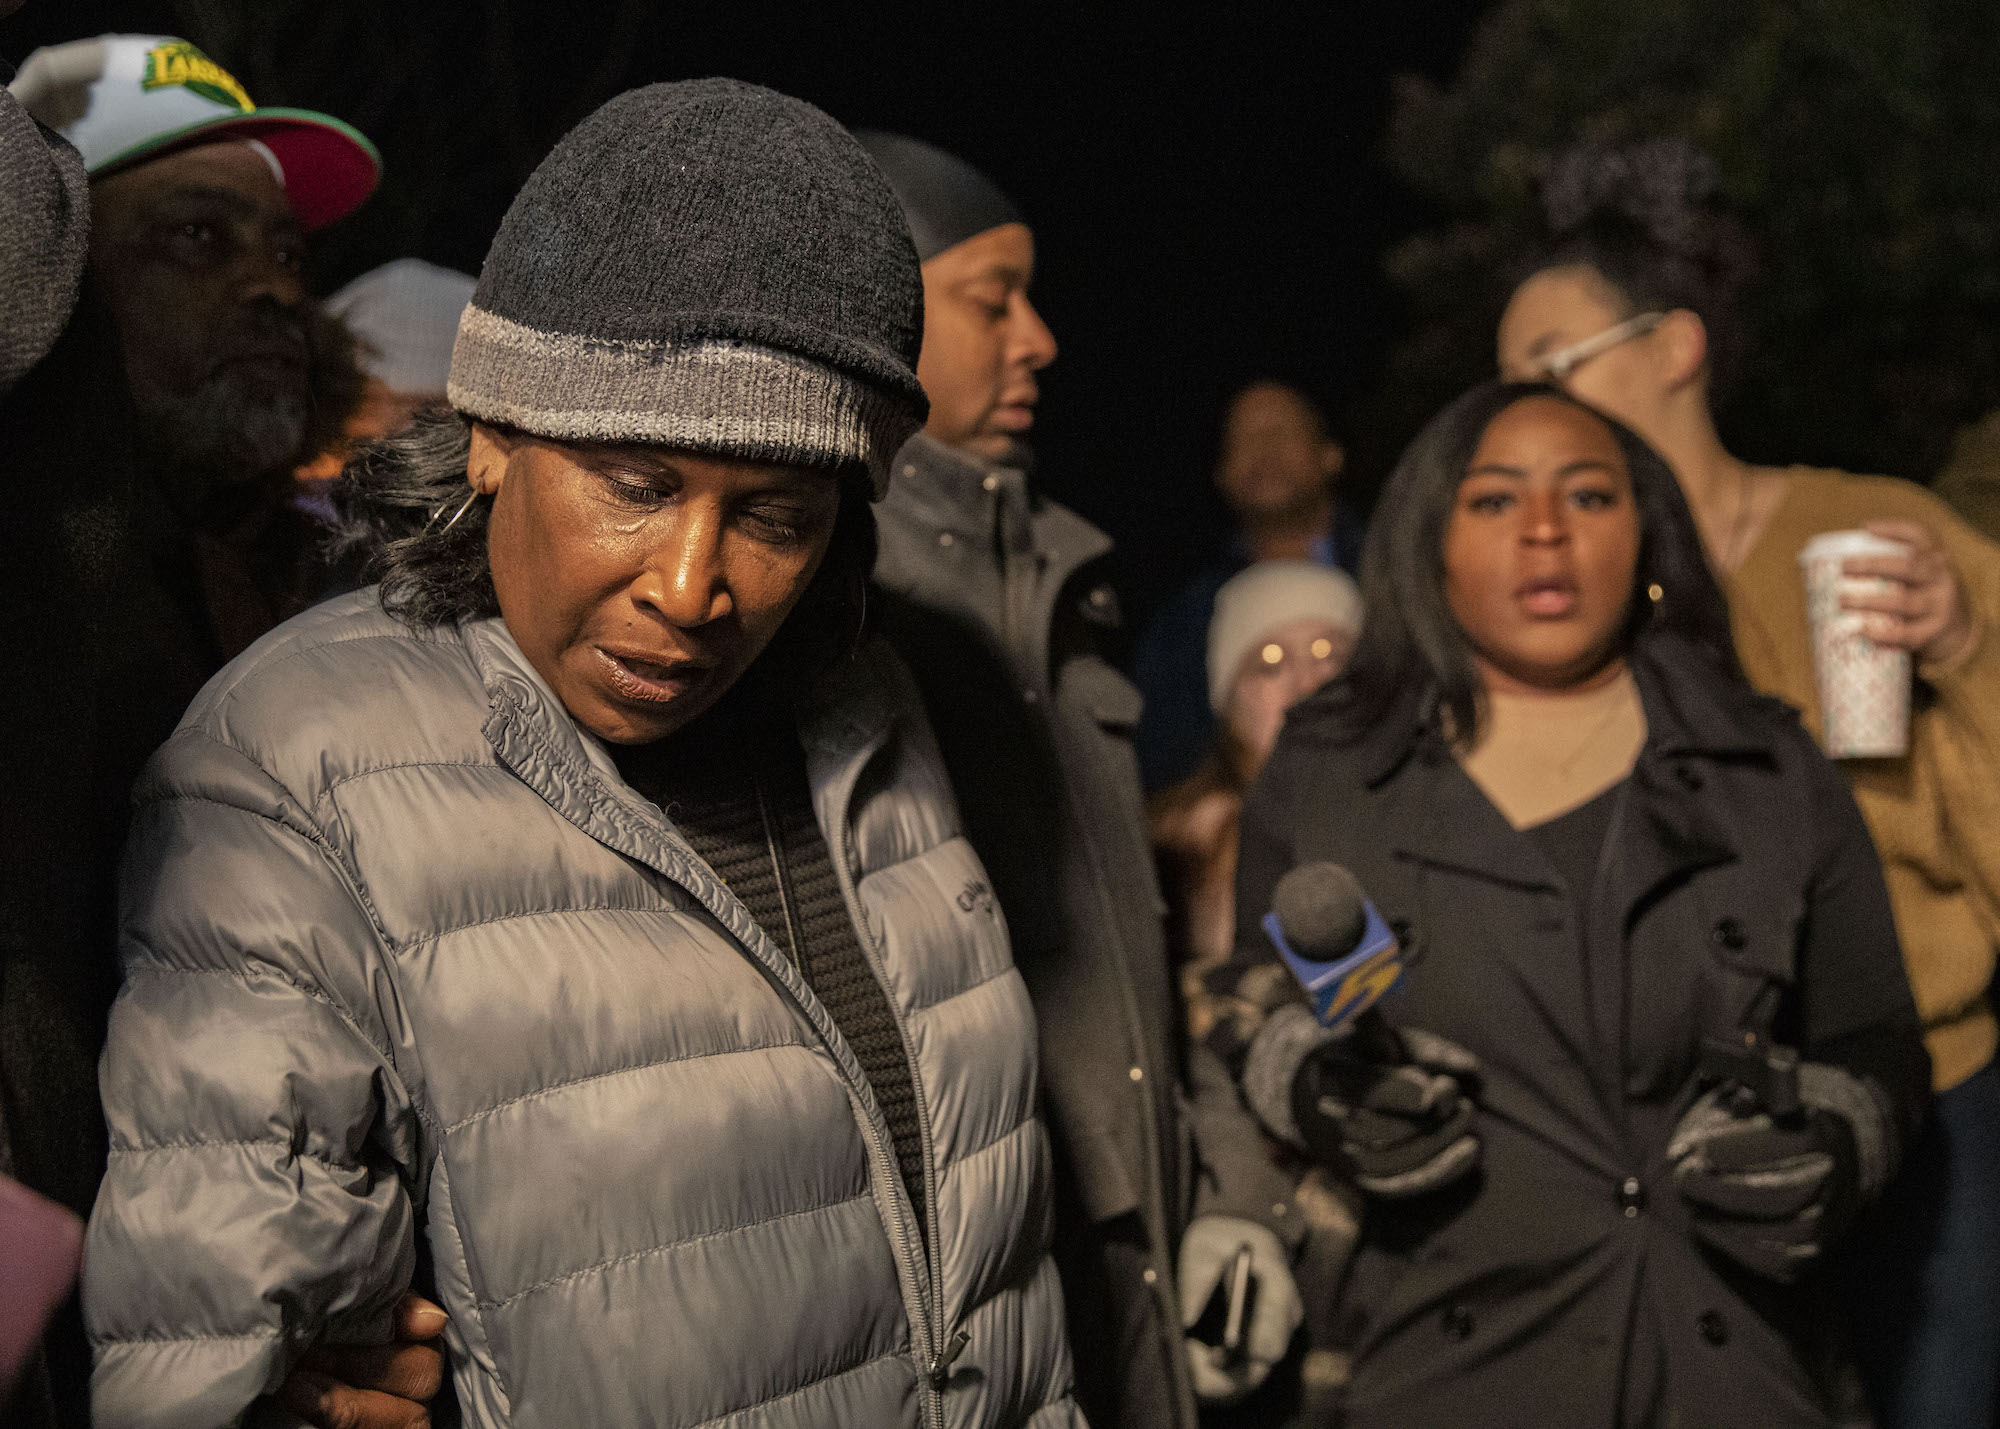 Tyre Nichols' mother is seen at a candlelight vigil in memory of him at Tobey Skatepark in Memphis on Thursday, January 26, 2023.